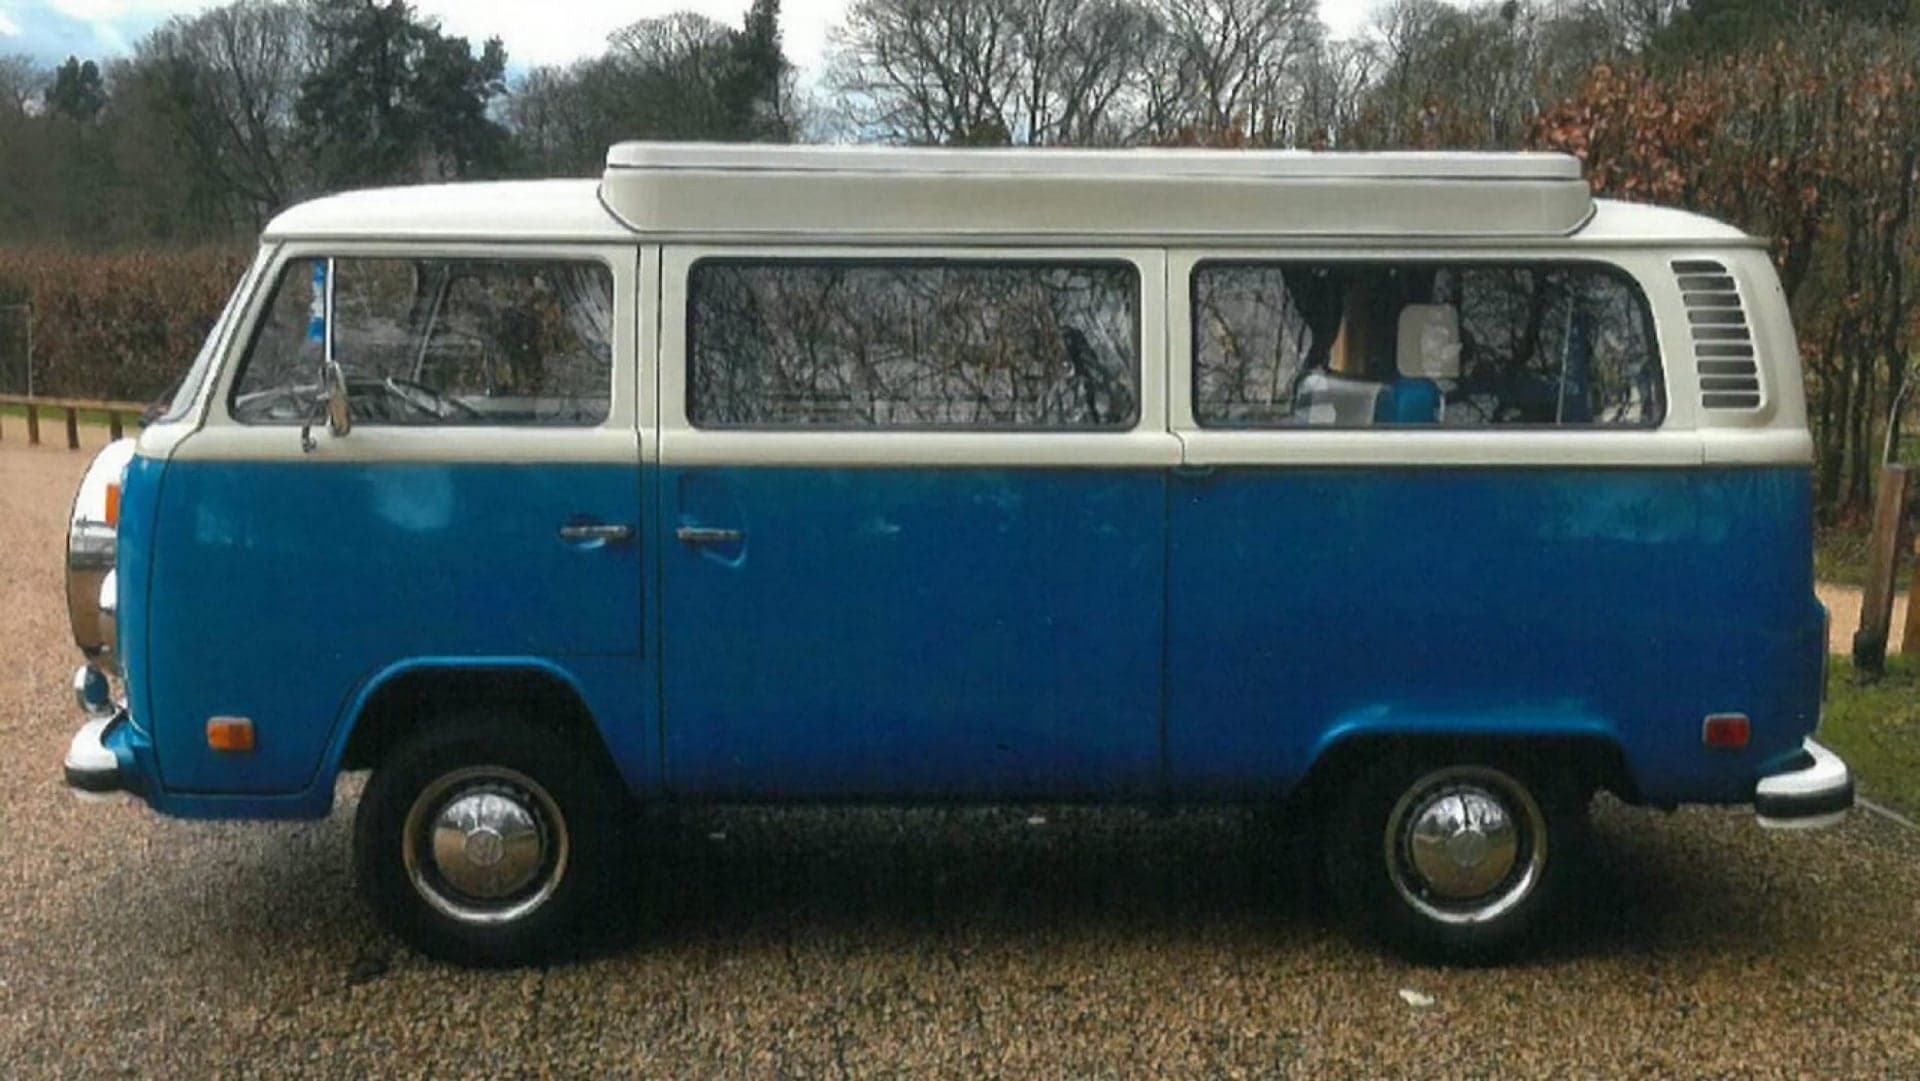 Man Busted by Insurance Company for ‘Awarding’ Himself Much Newer, Nicer VW Camper Van